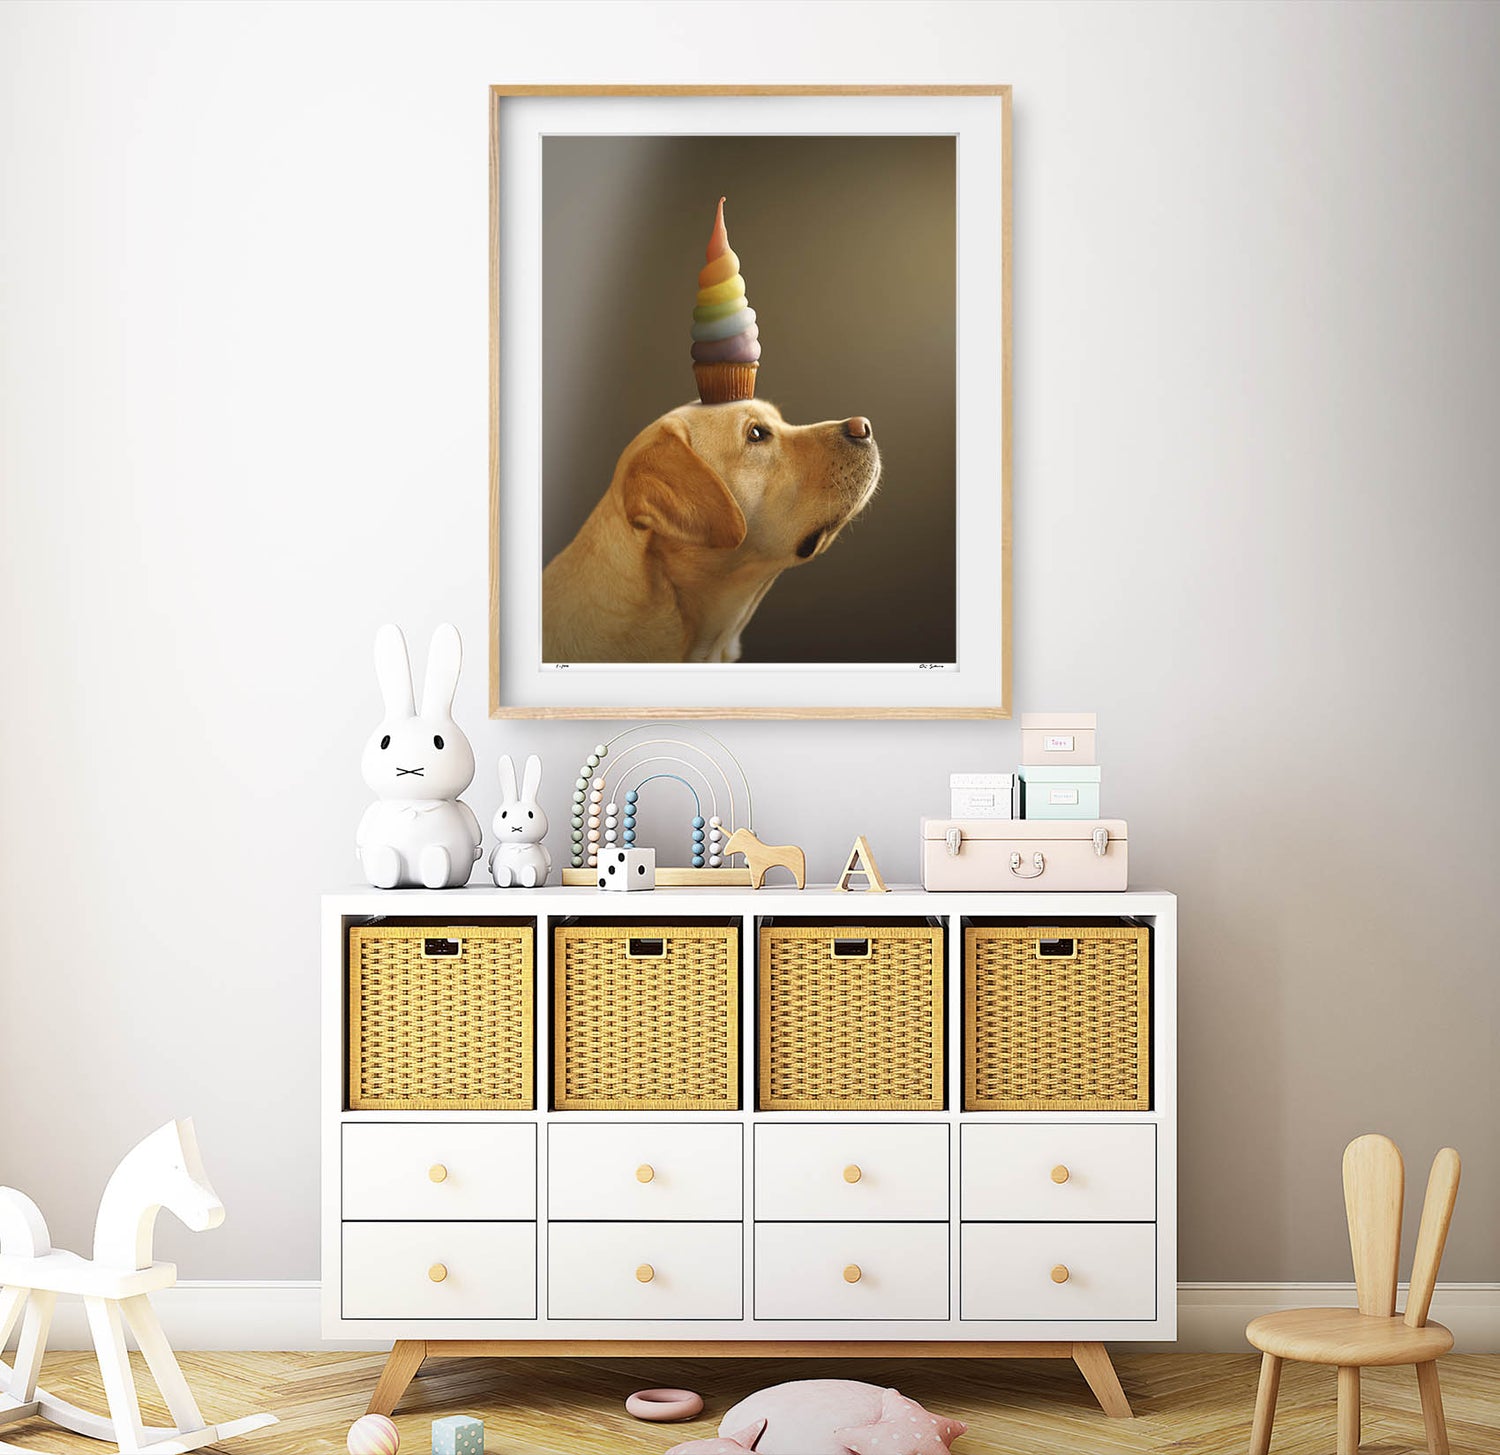 Yellow Labrador Unicorn with Rainbow Cupcake Horn Print by Artist Photographer Ron Schmidt - Signed Limited Edition Collective Fine Art Dog Prints for Childrens Bedroom Playroom Nursery